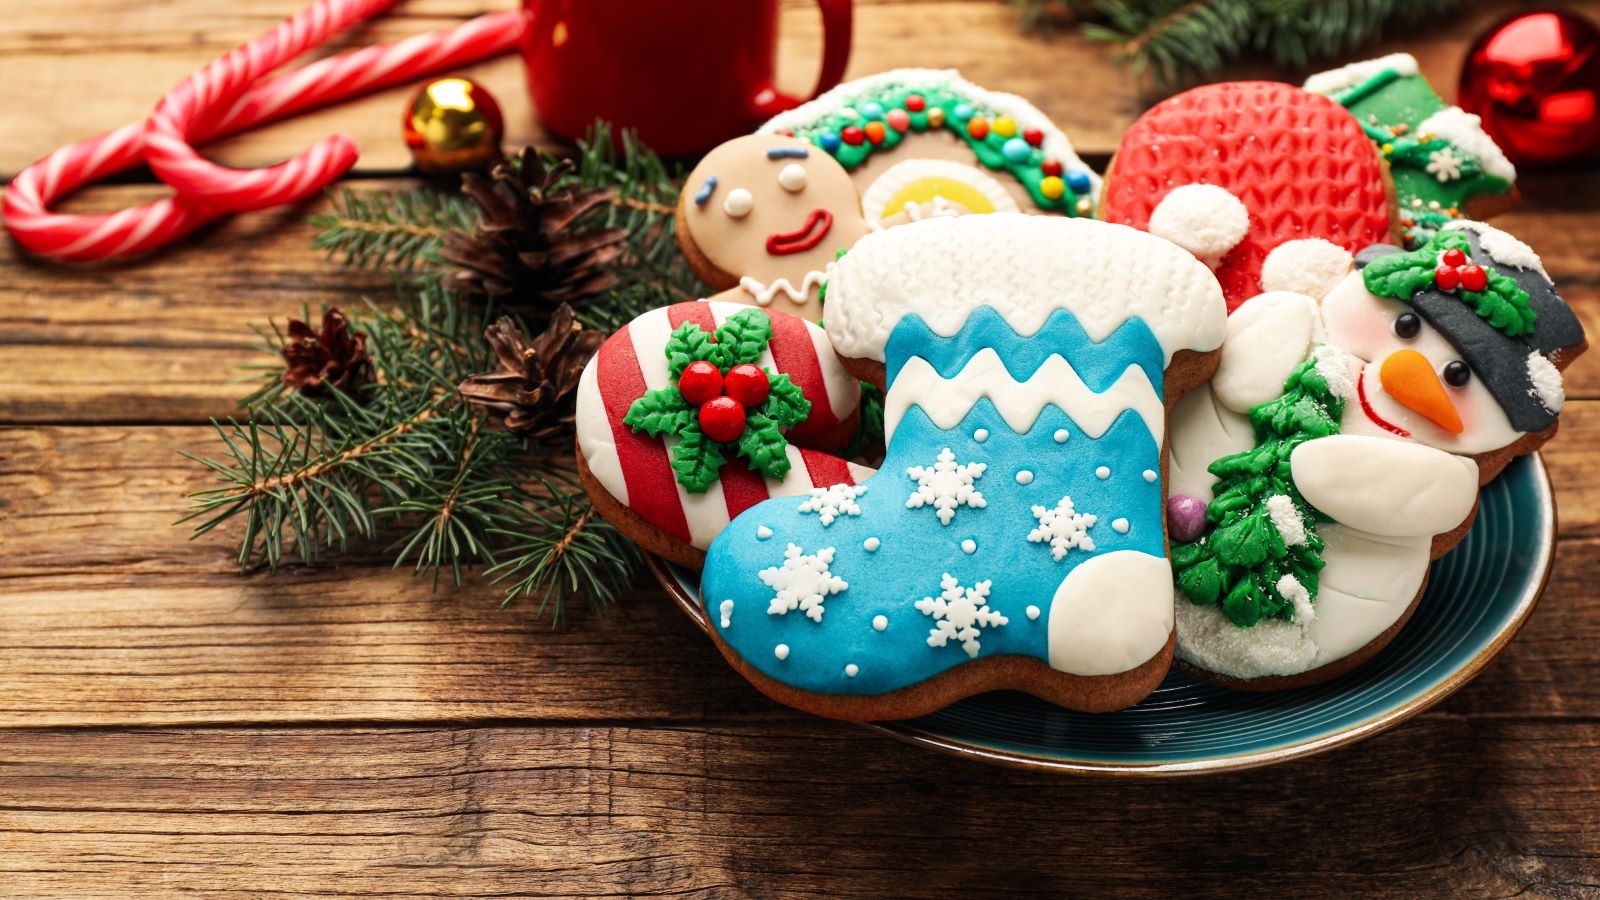 3 Tips to Make Your Christmas Cookies a Little Healthier